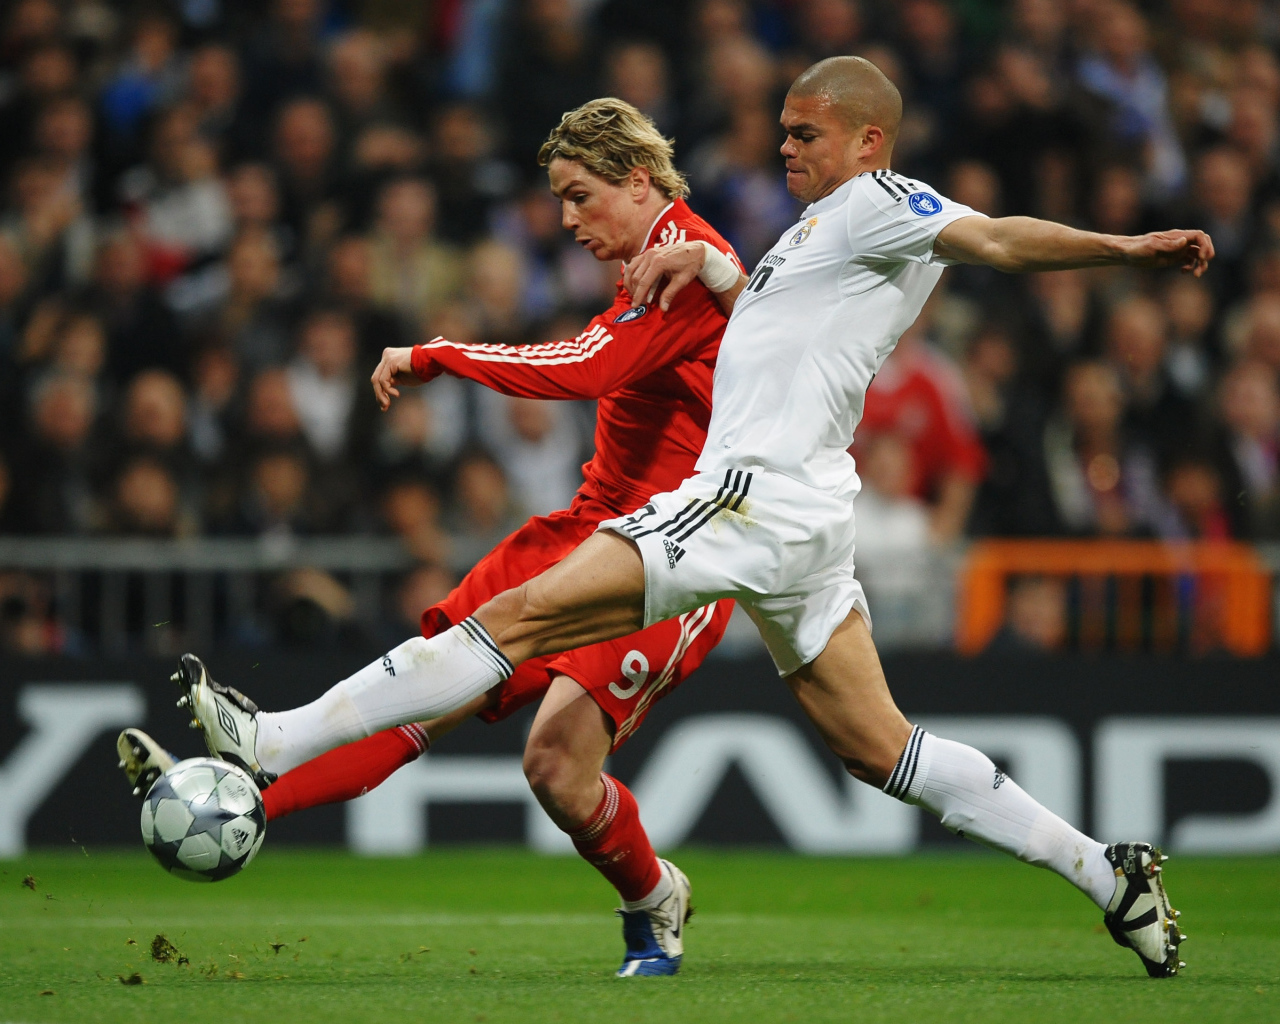 The player of Real Madrid Pepe trying to take the ball